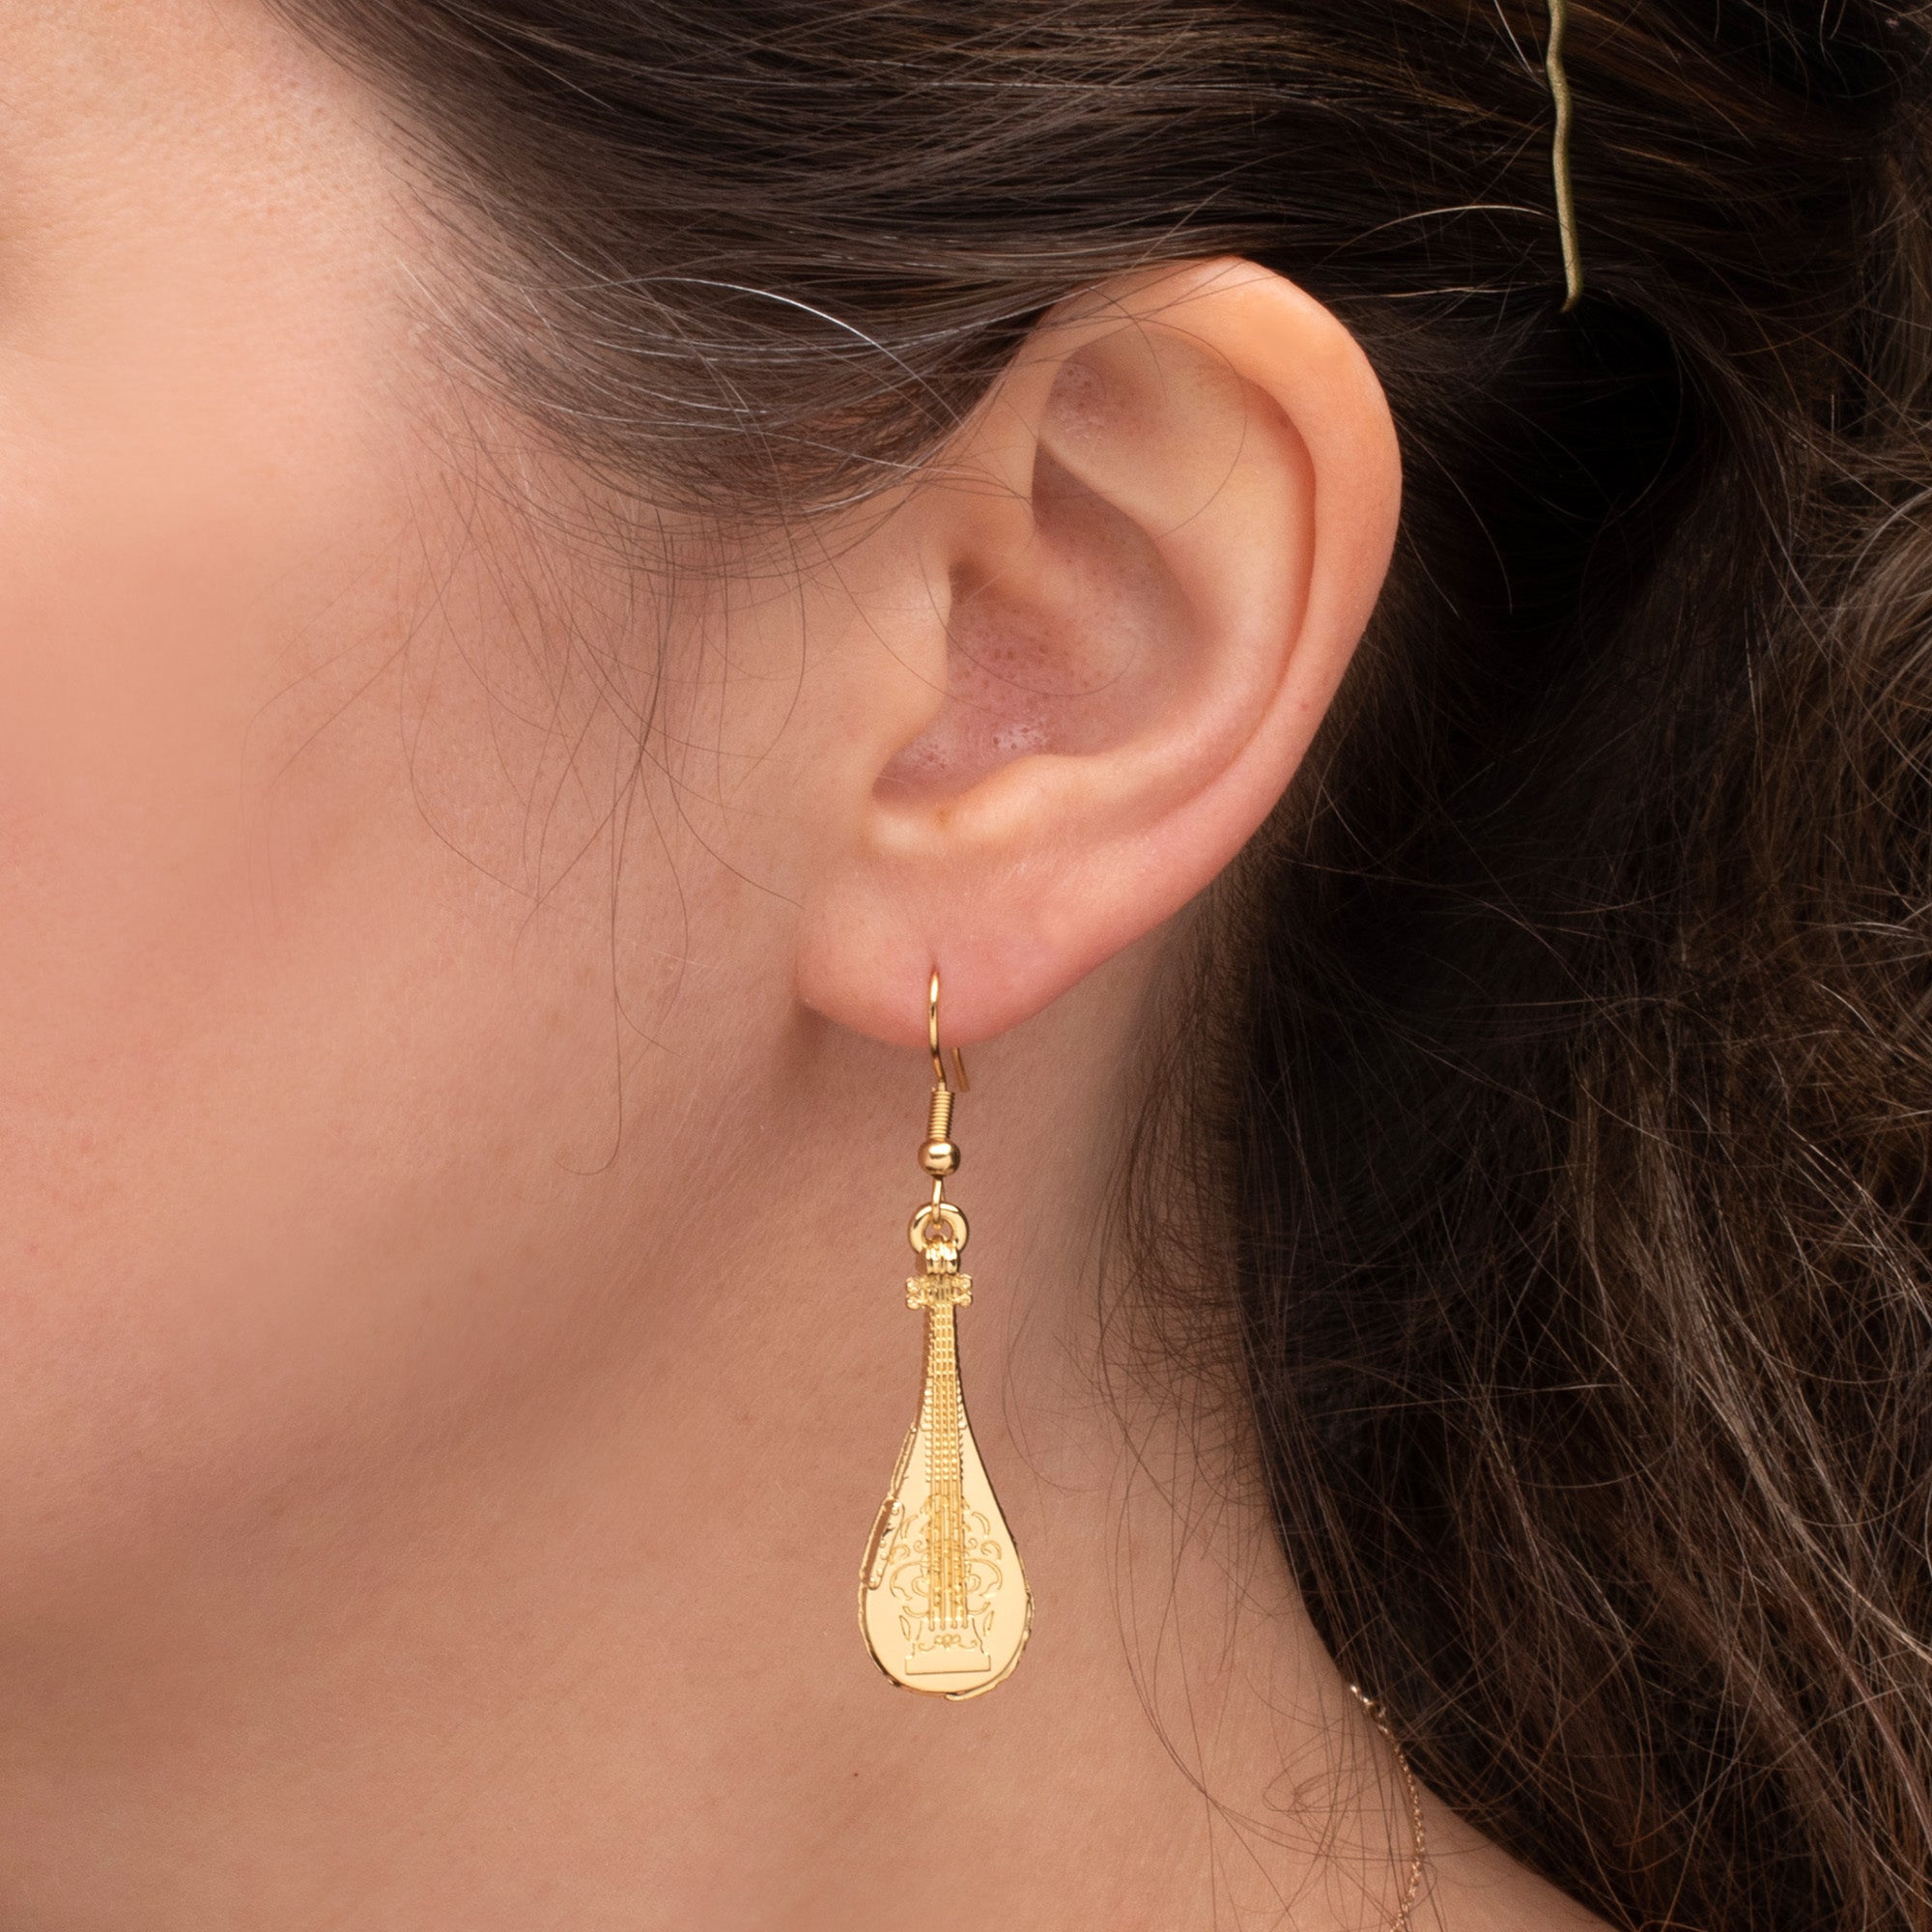 Dungeons & Dragons: Honor Among Thieves Lute 3D Drop Earrings